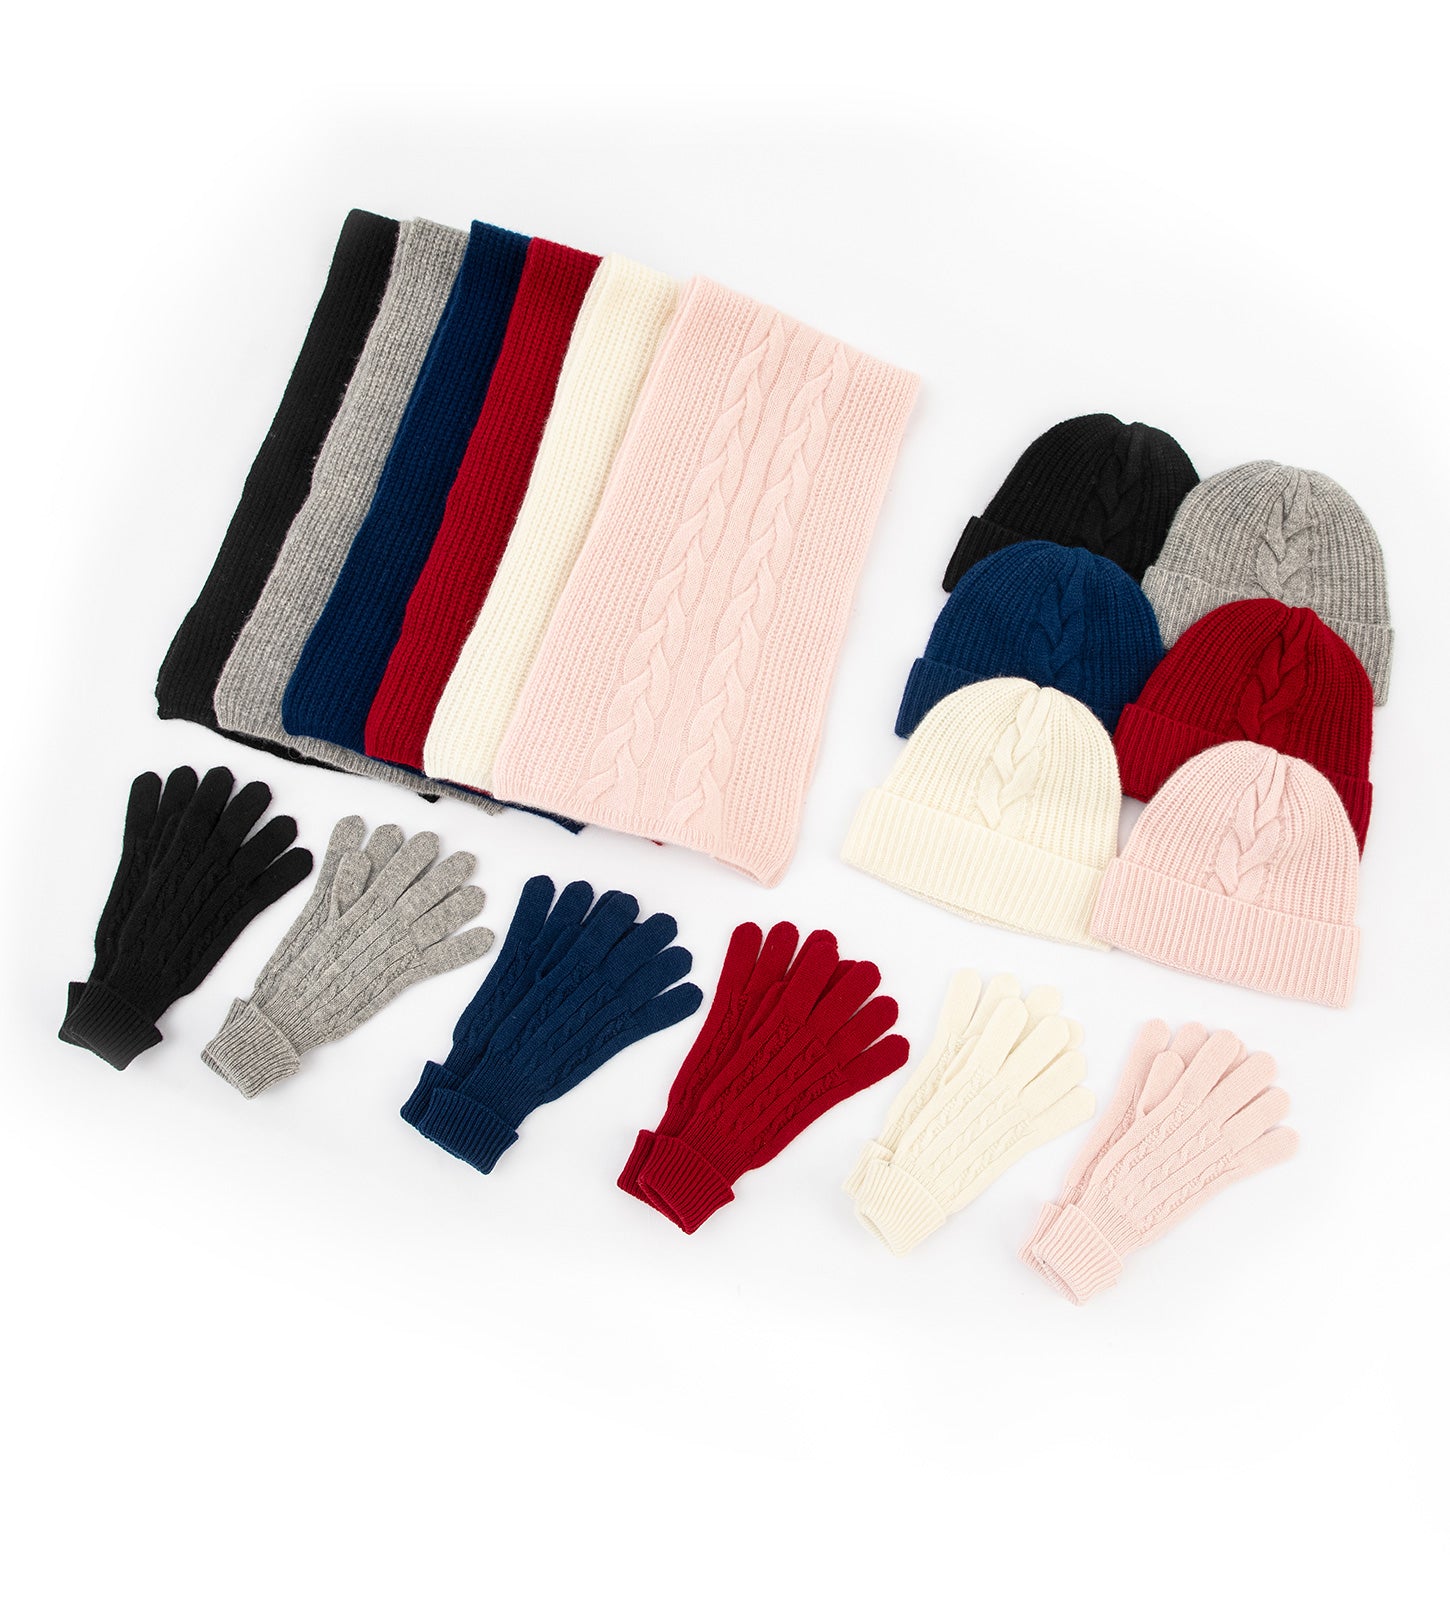 100% Lambswool Scarf, Hat and Gloves Set